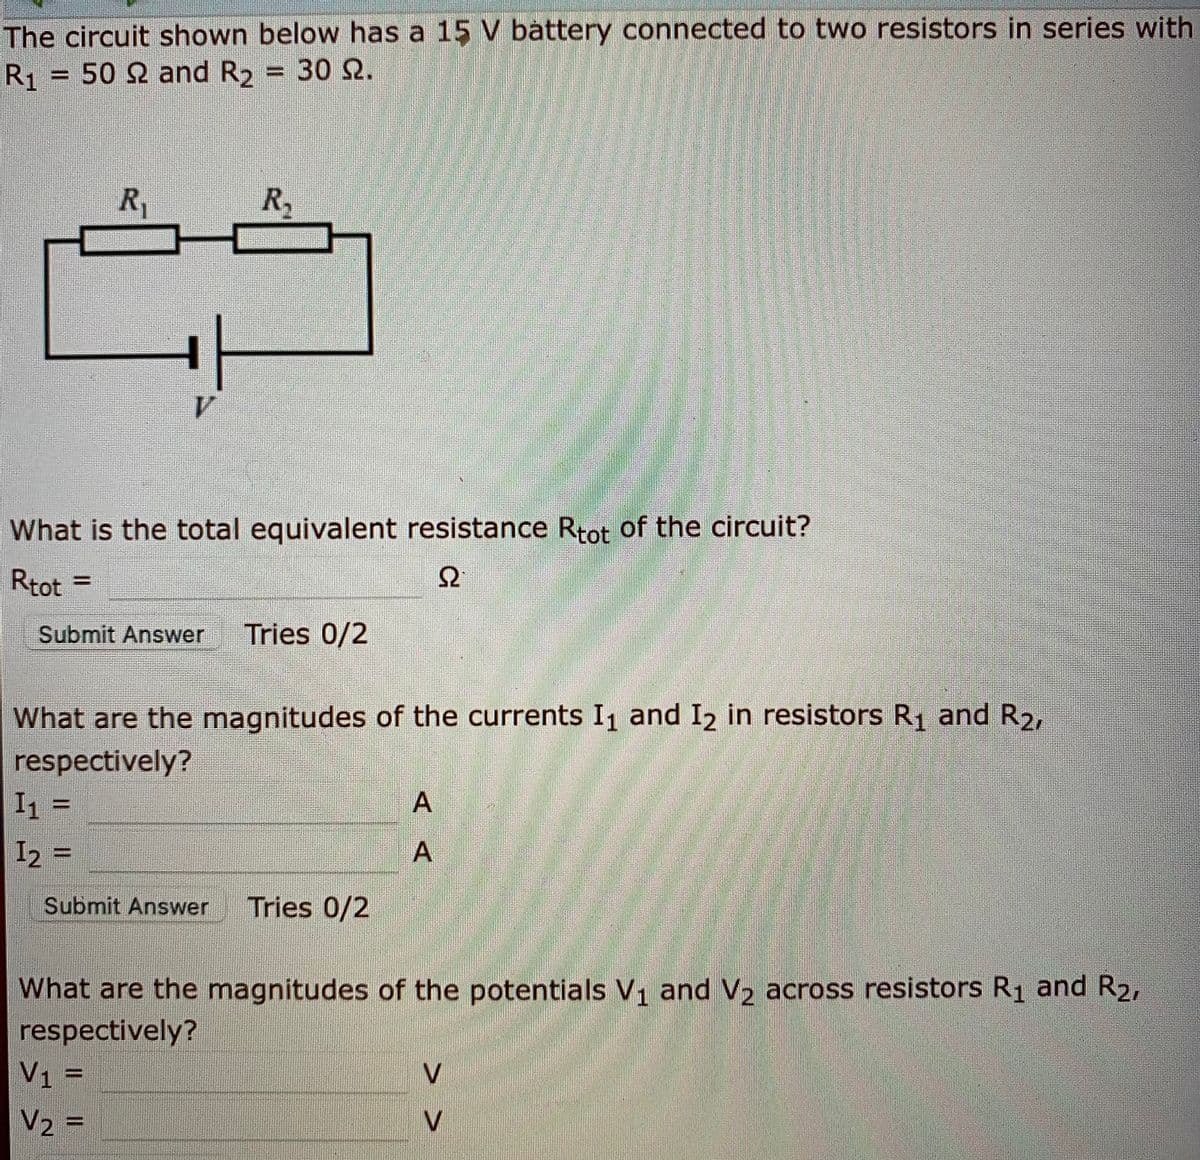 The circuit shown below has a 15 V battery connected to two resistors in series with
R1 = 50 2 and R2 = 30 Q.
R,
1.
What is the total equivalent resistance Rtot of the circuit?
Rtot
Ω
=
%3D
Submit Answer
Tries 0/2
What are the magnitudes of the currents I1 and I2 in resistors R1 and R2,
respectively?
I1 =
A
%3D
I2 =
A
Submit Answer
Tries 0/2
What are the magnitudes of the potentials V1 and V2 across resistors R1 and R2,
respectively?
V1 =
V2 =
